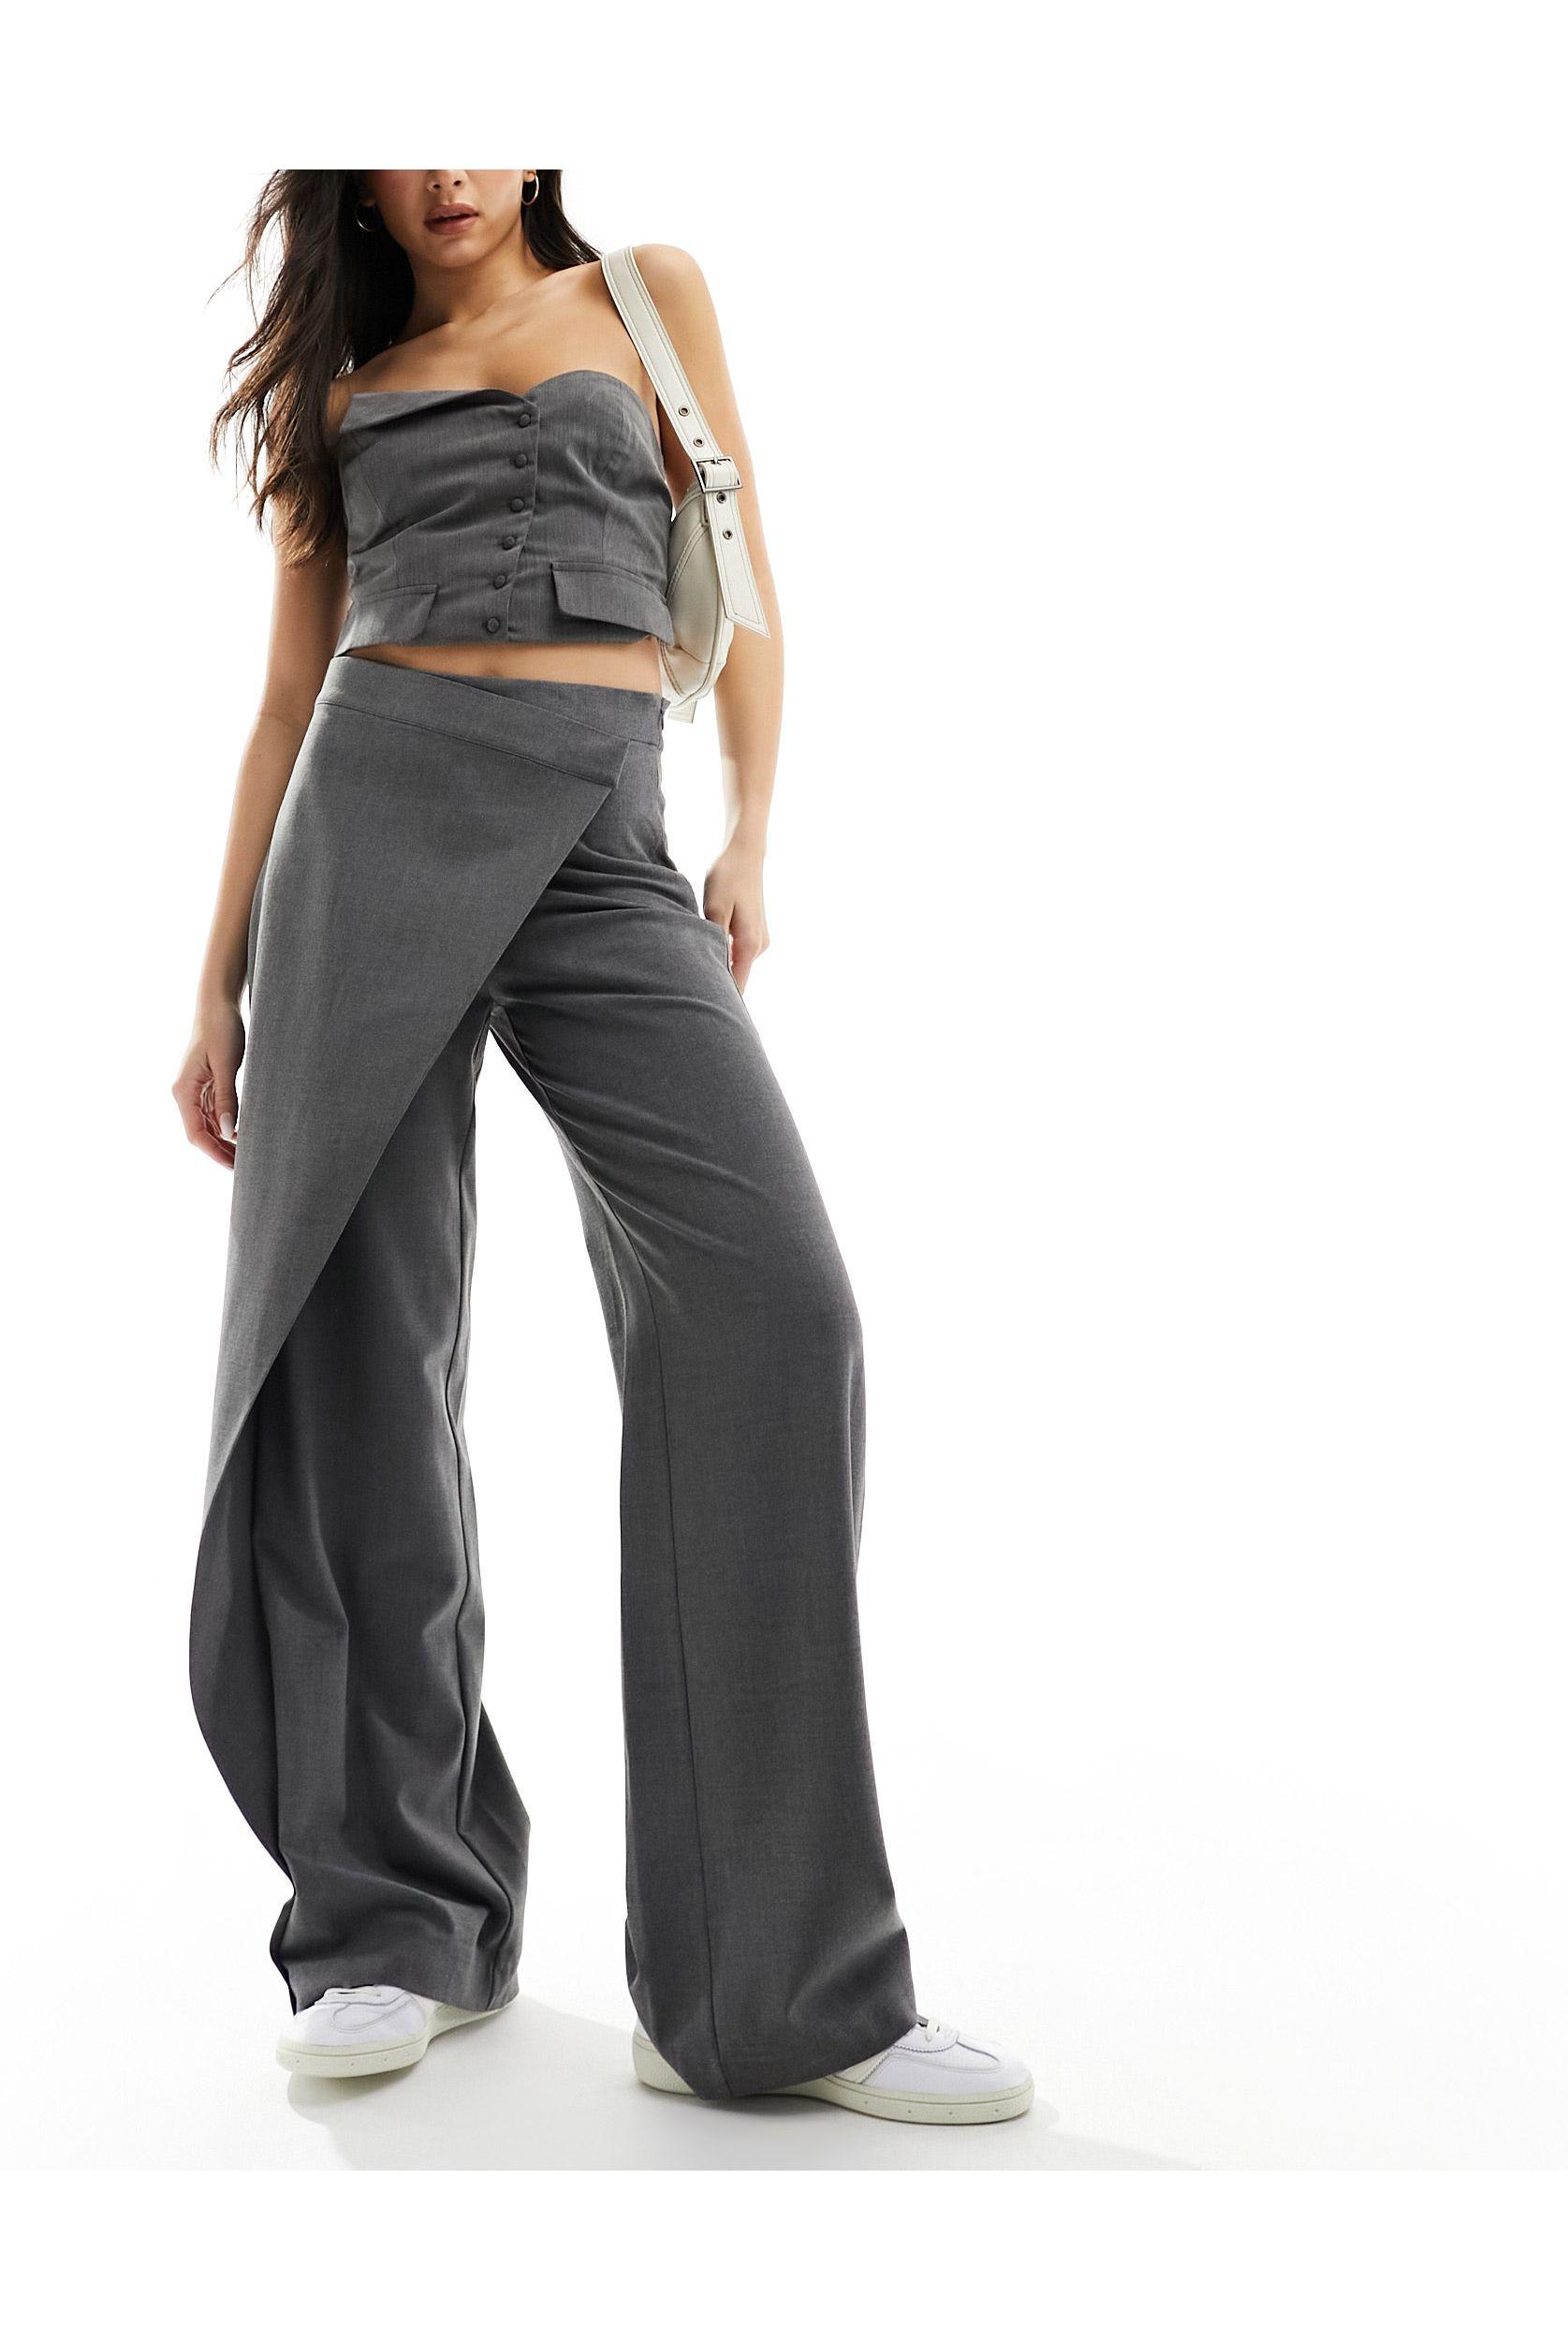 Pull&Bear high waisted seam front tailored straight leg pants in gray